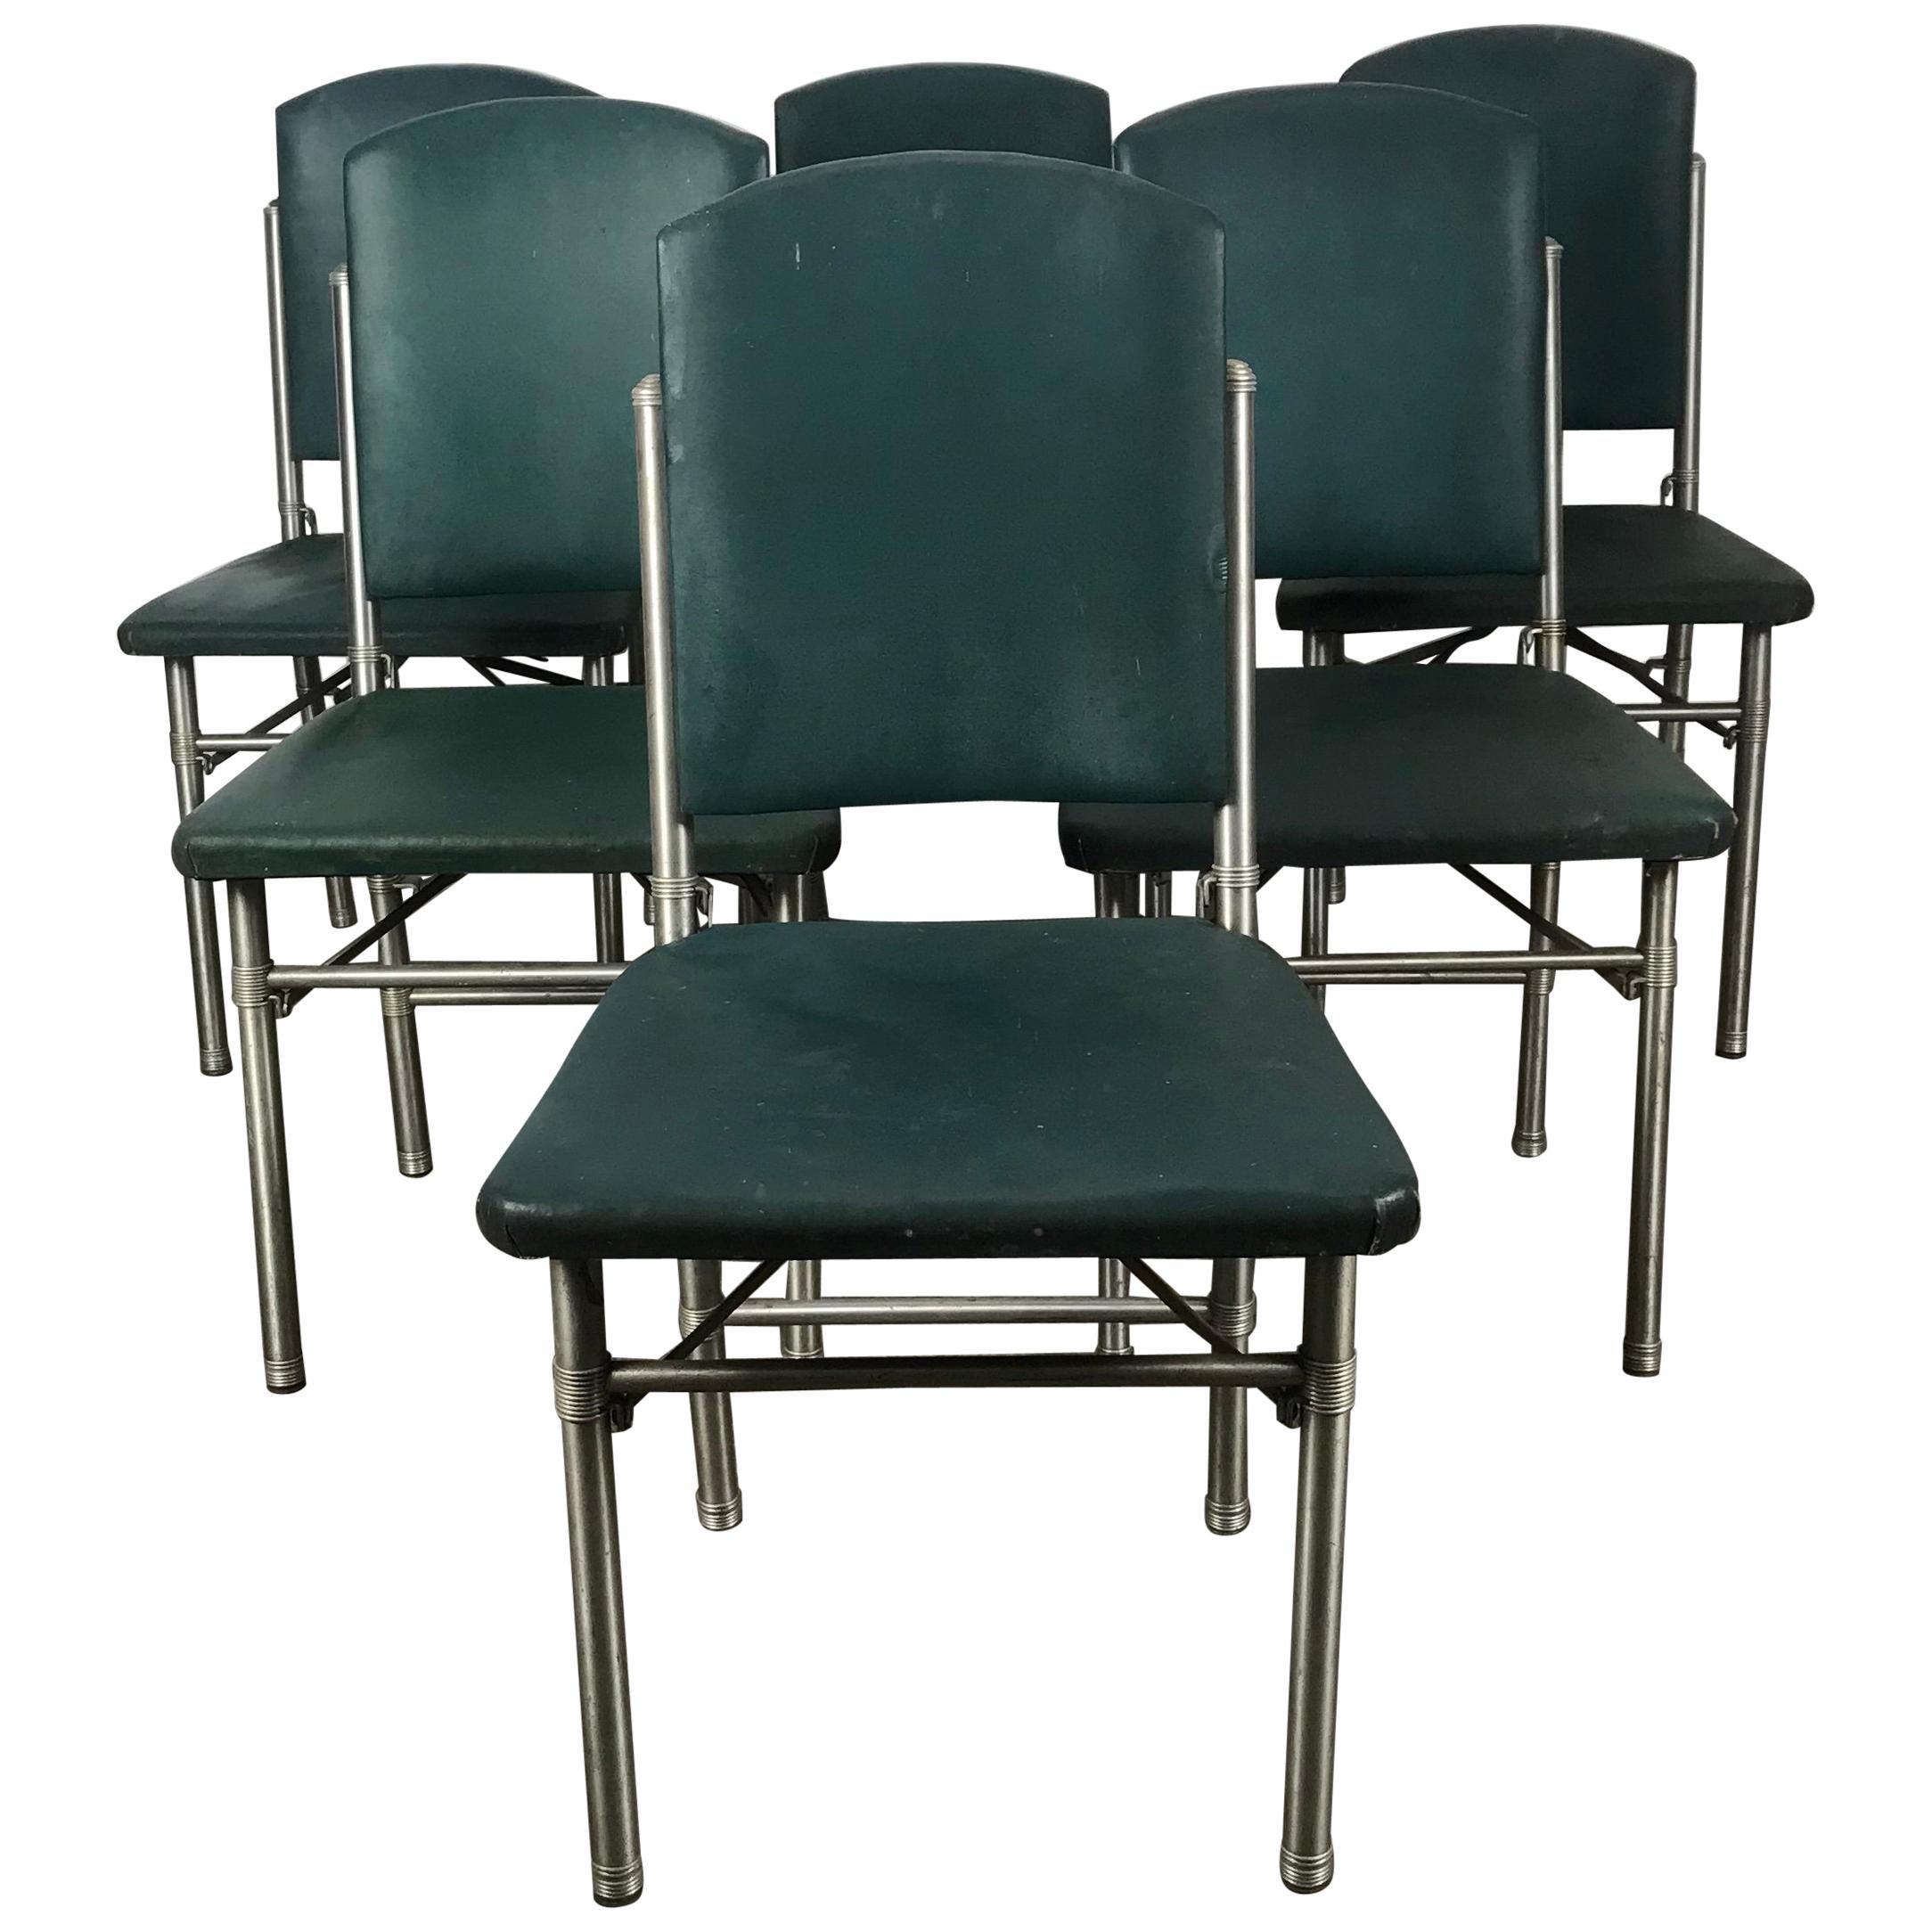 Classic set of 6 Side Dining Chairs by Warren McArthur..Art Deco, Machine Age